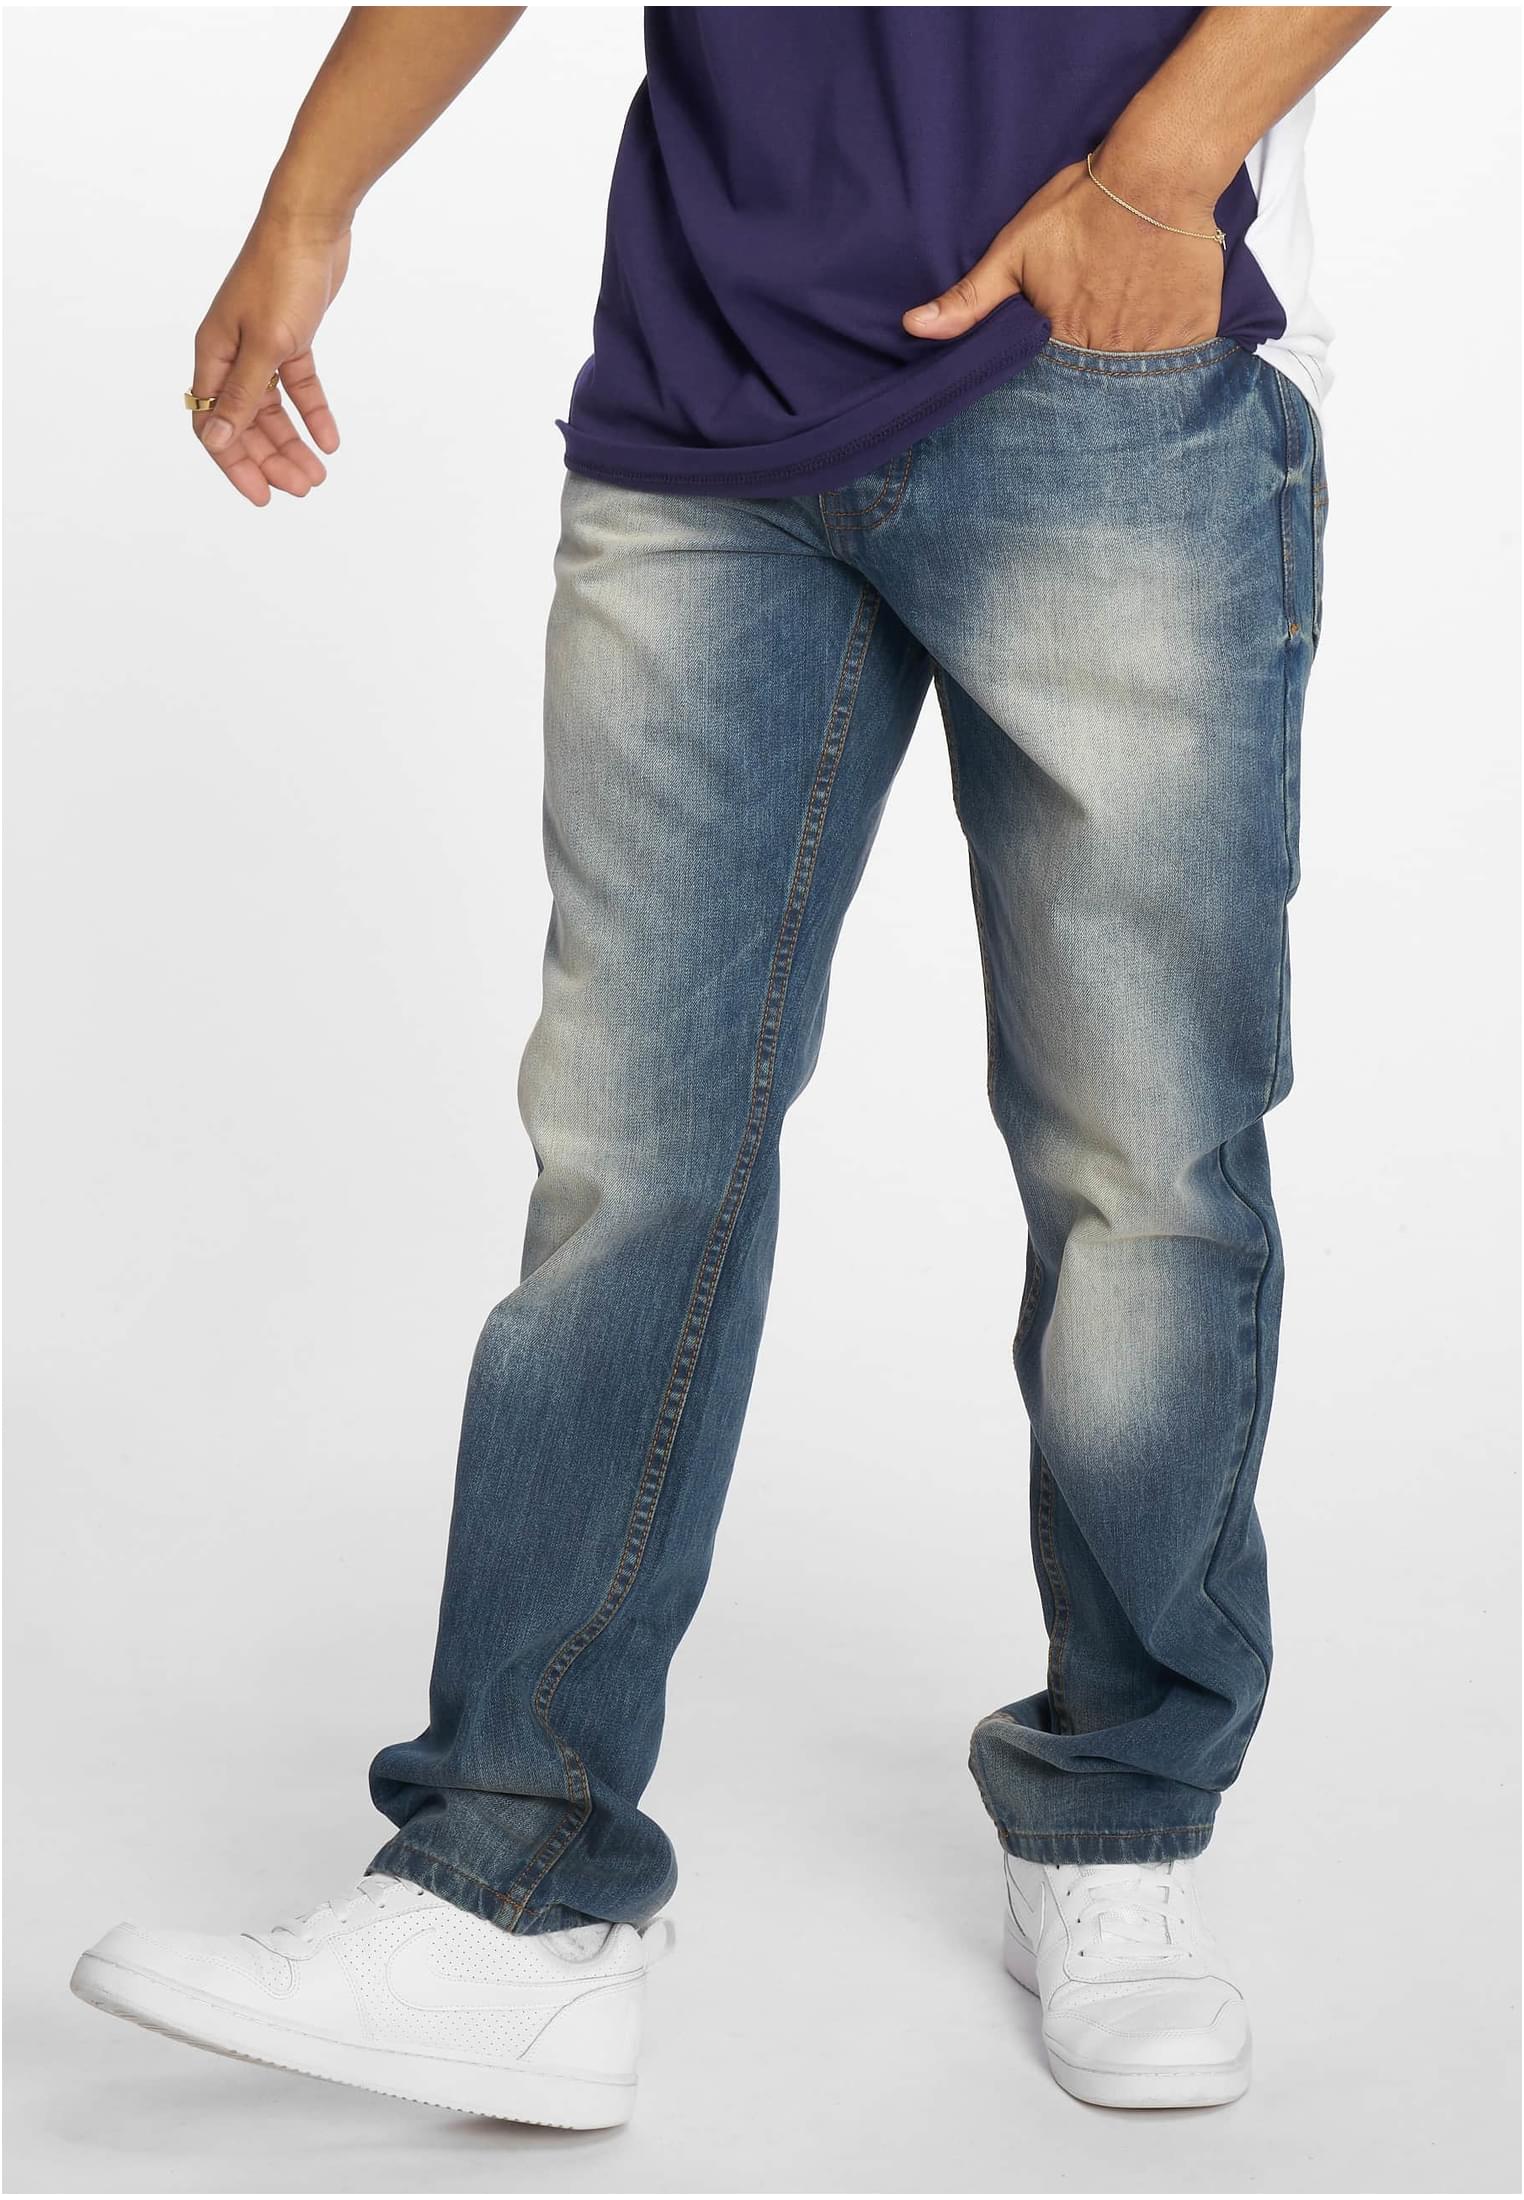 Rocawear TUE Rela/ Fit Jeans